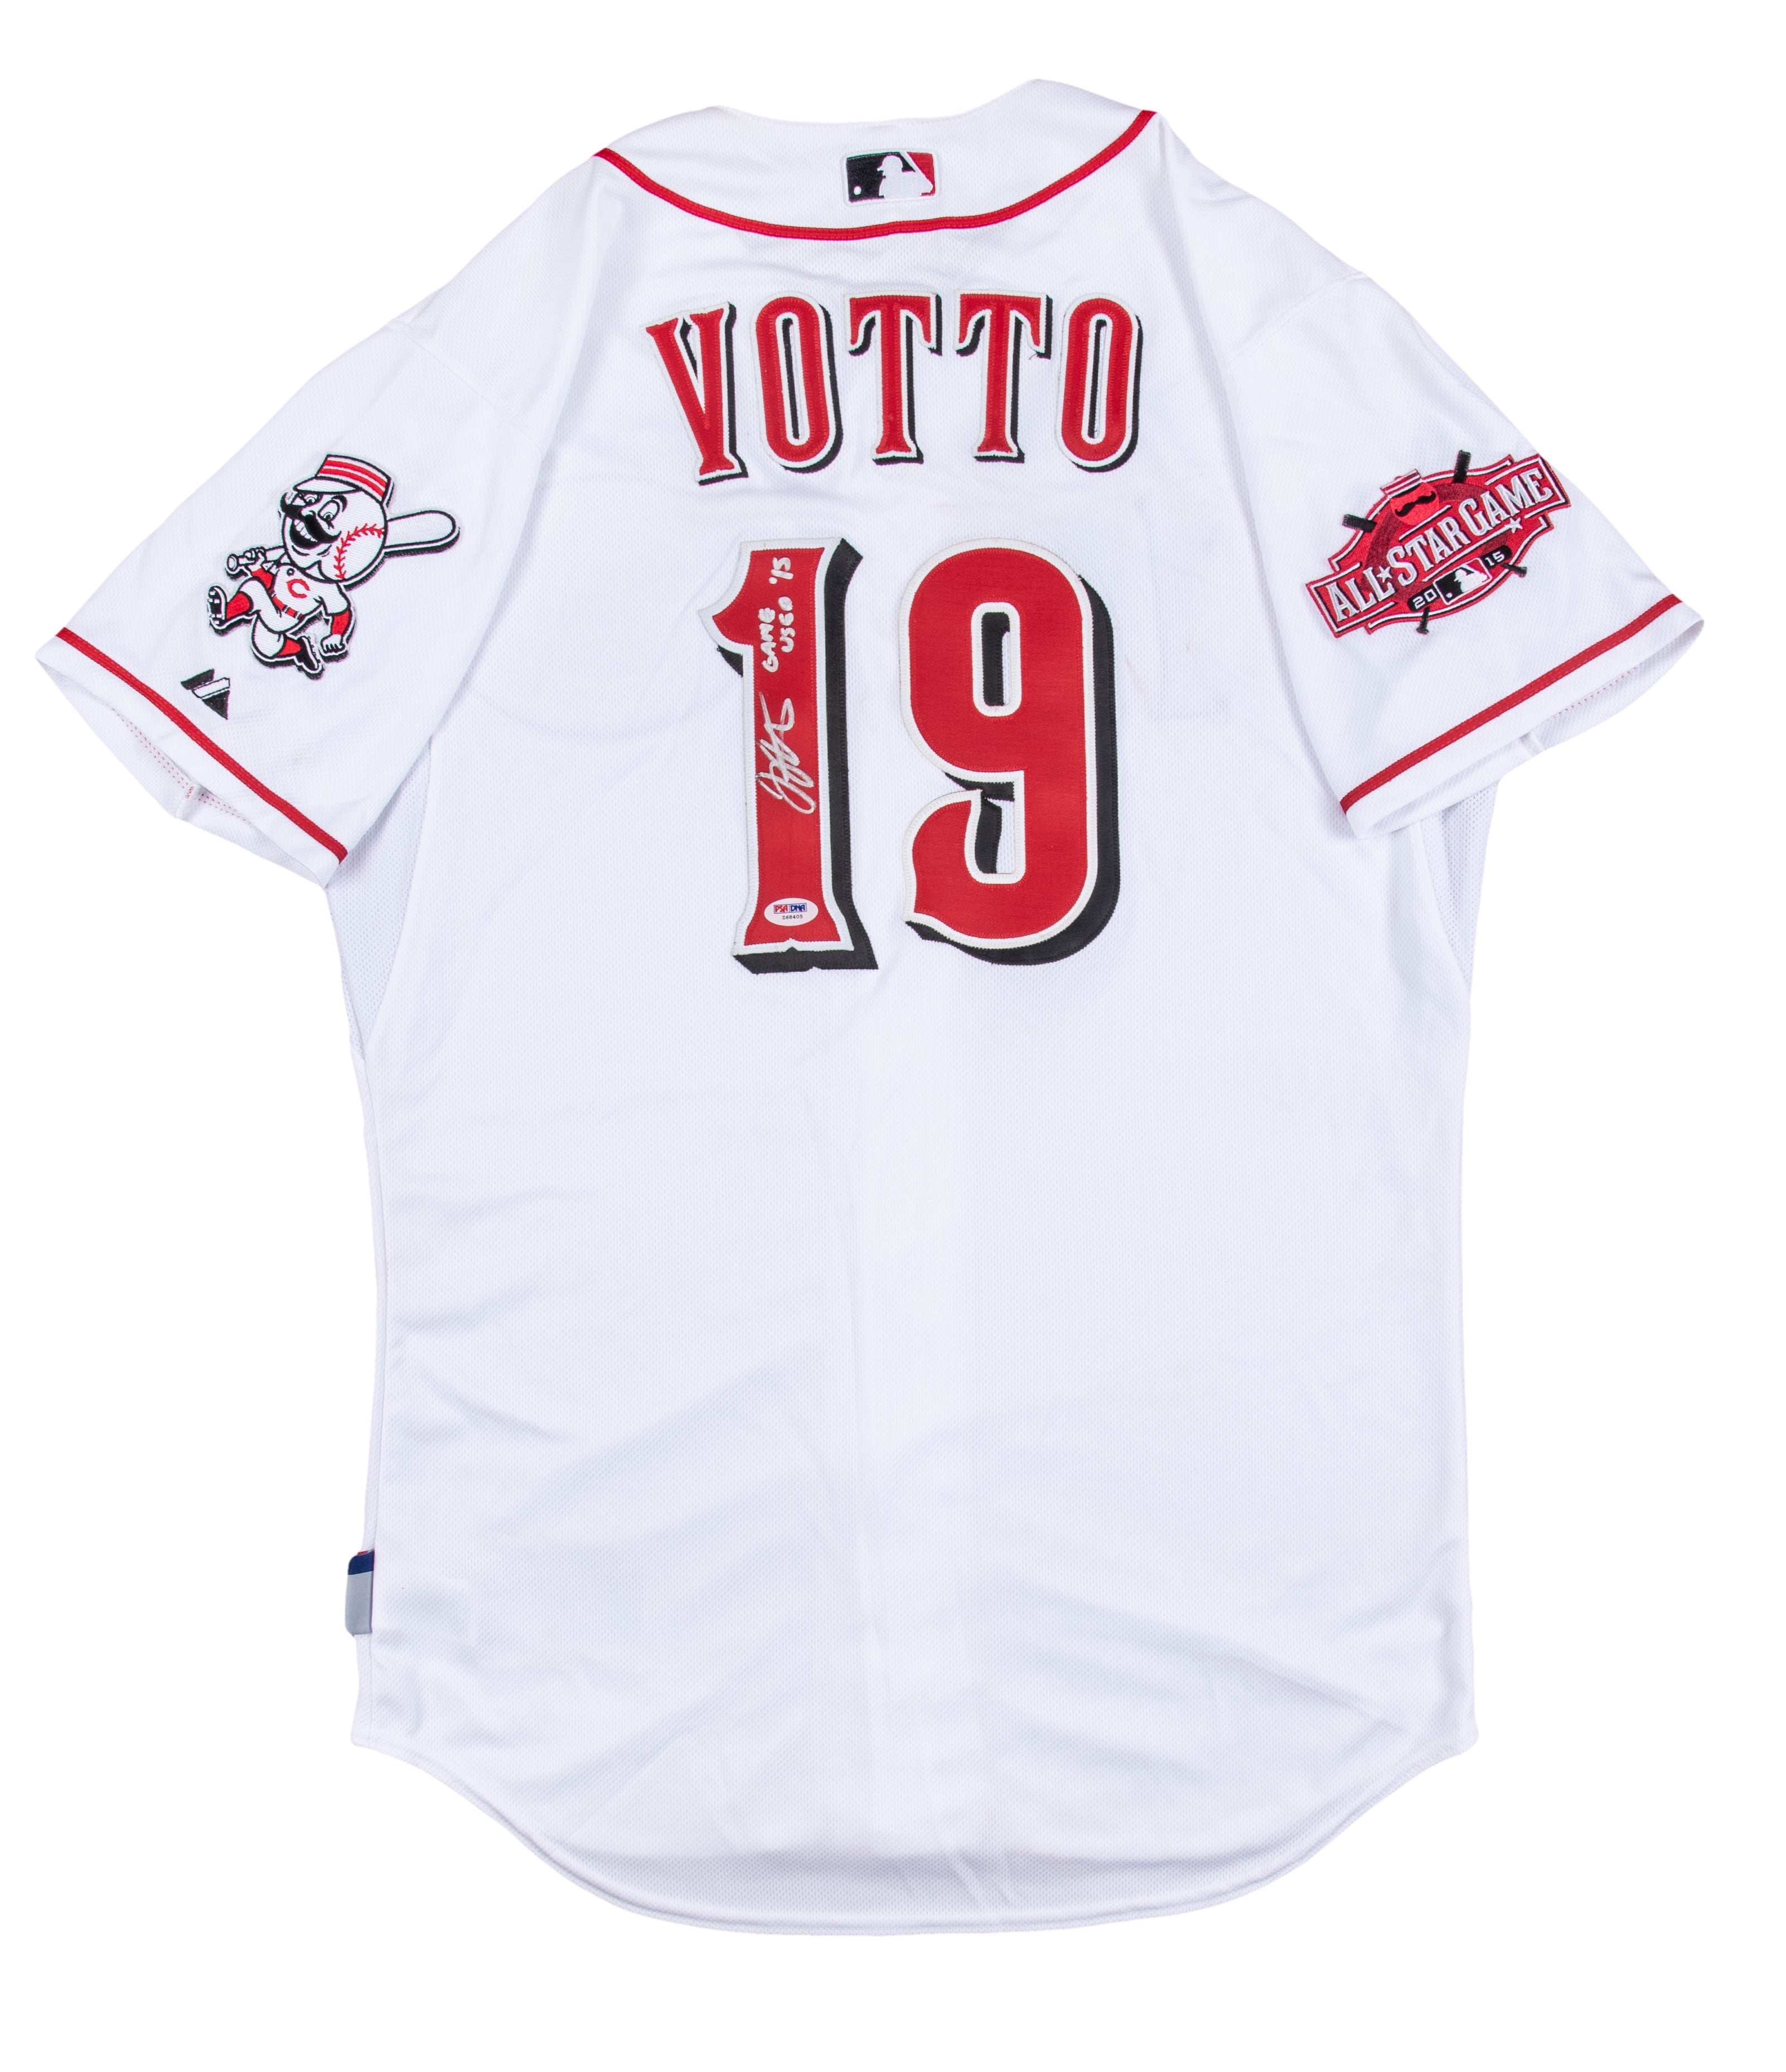 Joey Votto Autographed 2010 NL MVP Authentic Reds Jersey